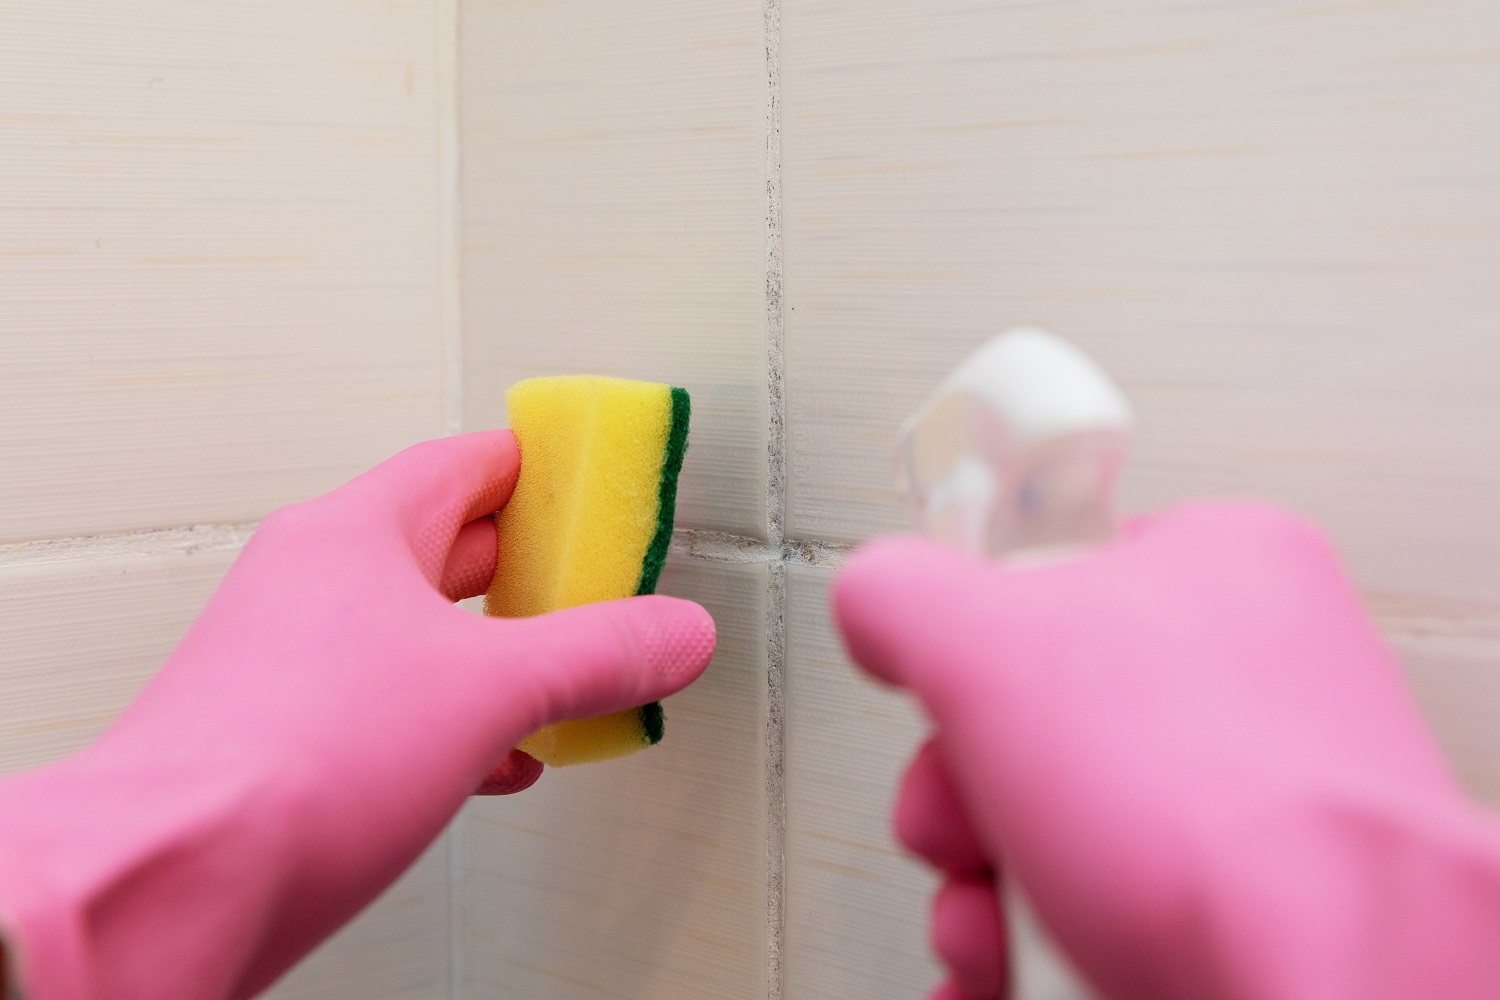 Close up image of someone wearing pink rubber gloves cleaning their bathroom tiles with a sponge and spray bottles